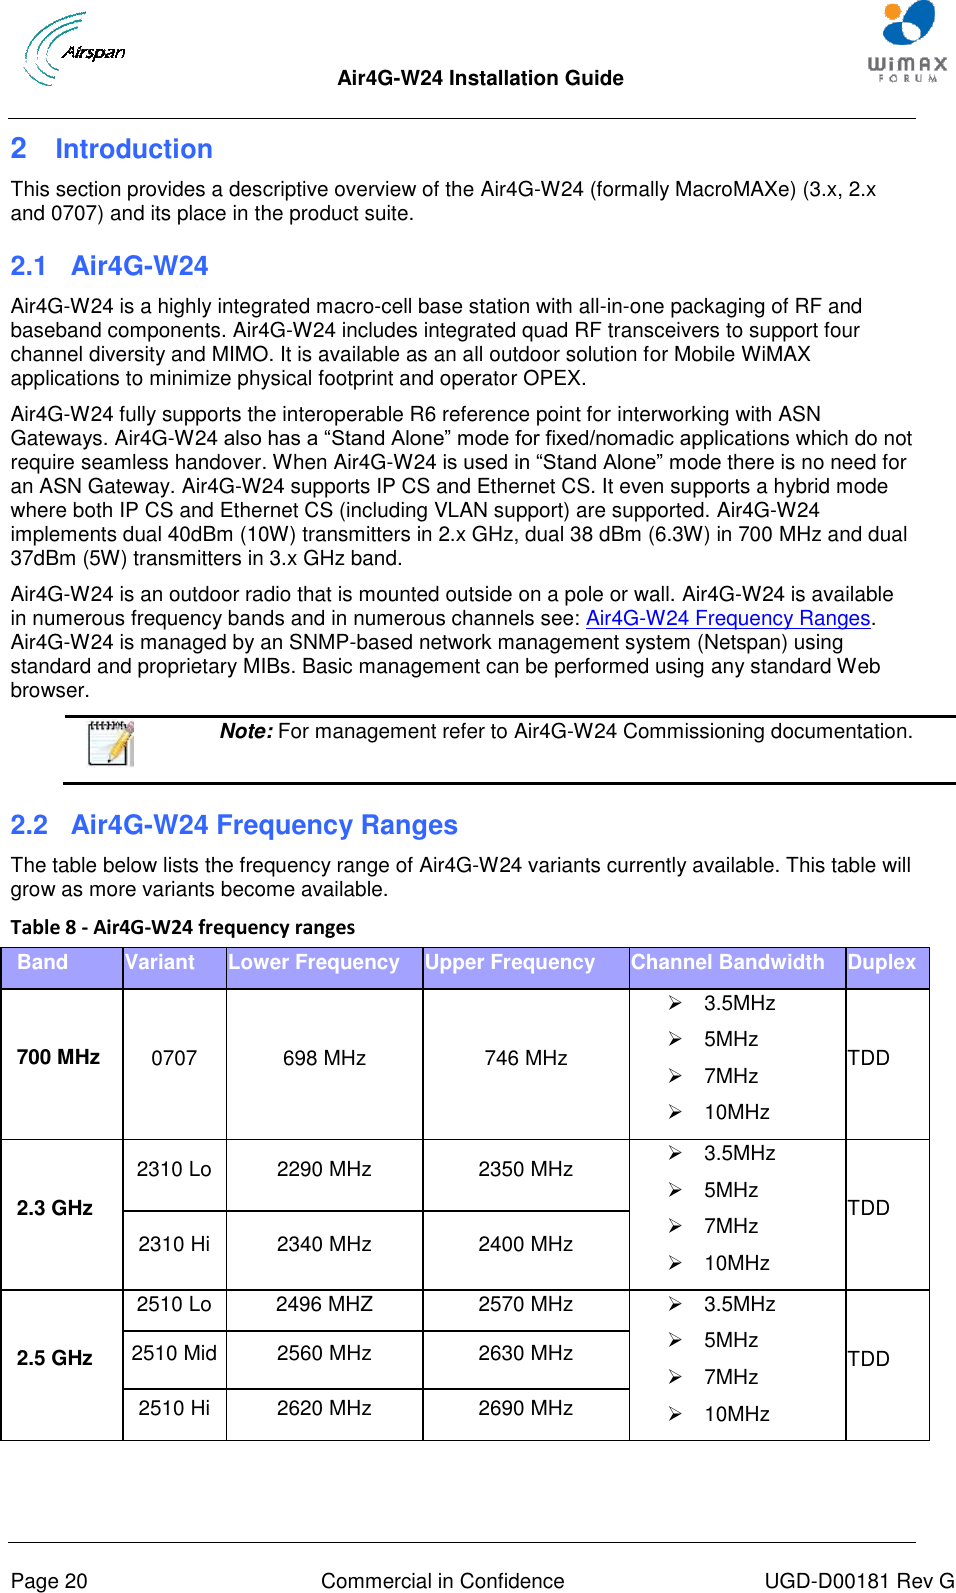  Air4G-W24 Installation Guide       Page 20  Commercial in Confidence  UGD-D00181 Rev G 2  Introduction This section provides a descriptive overview of the Air4G-W24 (formally MacroMAXe) (3.x, 2.x and 0707) and its place in the product suite. 2.1  Air4G-W24 Air4G-W24 is a highly integrated macro-cell base station with all-in-one packaging of RF and baseband components. Air4G-W24 includes integrated quad RF transceivers to support four channel diversity and MIMO. It is available as an all outdoor solution for Mobile WiMAX applications to minimize physical footprint and operator OPEX. Air4G-W24 fully supports the interoperable R6 reference point for interworking with ASN Gateways. Air4G-W24 also has a “Stand Alone” mode for fixed/nomadic applications which do not require seamless handover. When Air4G-W24 is used in “Stand Alone” mode there is no need for an ASN Gateway. Air4G-W24 supports IP CS and Ethernet CS. It even supports a hybrid mode where both IP CS and Ethernet CS (including VLAN support) are supported. Air4G-W24 implements dual 40dBm (10W) transmitters in 2.x GHz, dual 38 dBm (6.3W) in 700 MHz and dual 37dBm (5W) transmitters in 3.x GHz band. Air4G-W24 is an outdoor radio that is mounted outside on a pole or wall. Air4G-W24 is available in numerous frequency bands and in numerous channels see: Air4G-W24 Frequency Ranges.Air4G-W24 is managed by an SNMP-based network management system (Netspan) using standard and proprietary MIBs. Basic management can be performed using any standard Web browser.  Note: For management refer to Air4G-W24 Commissioning documentation. 2.2  Air4G-W24 Frequency Ranges The table below lists the frequency range of Air4G-W24 variants currently available. This table will grow as more variants become available. Table 8 - Air4G-W24 frequency ranges Band Variant Lower Frequency Upper Frequency Channel Bandwidth Duplex 700 MHz 0707 698 MHz 746 MHz   3.5MHz   5MHz   7MHz   10MHz TDD 2.3 GHz 2310 Lo 2290 MHz 2350 MHz   3.5MHz   5MHz   7MHz   10MHz TDD 2310 Hi 2340 MHz 2400 MHz 2.5 GHz 2510 Lo 2496 MHZ 2570 MHz   3.5MHz   5MHz   7MHz   10MHz TDD 2510 Mid 2560 MHz 2630 MHz 2510 Hi 2620 MHz 2690 MHz 